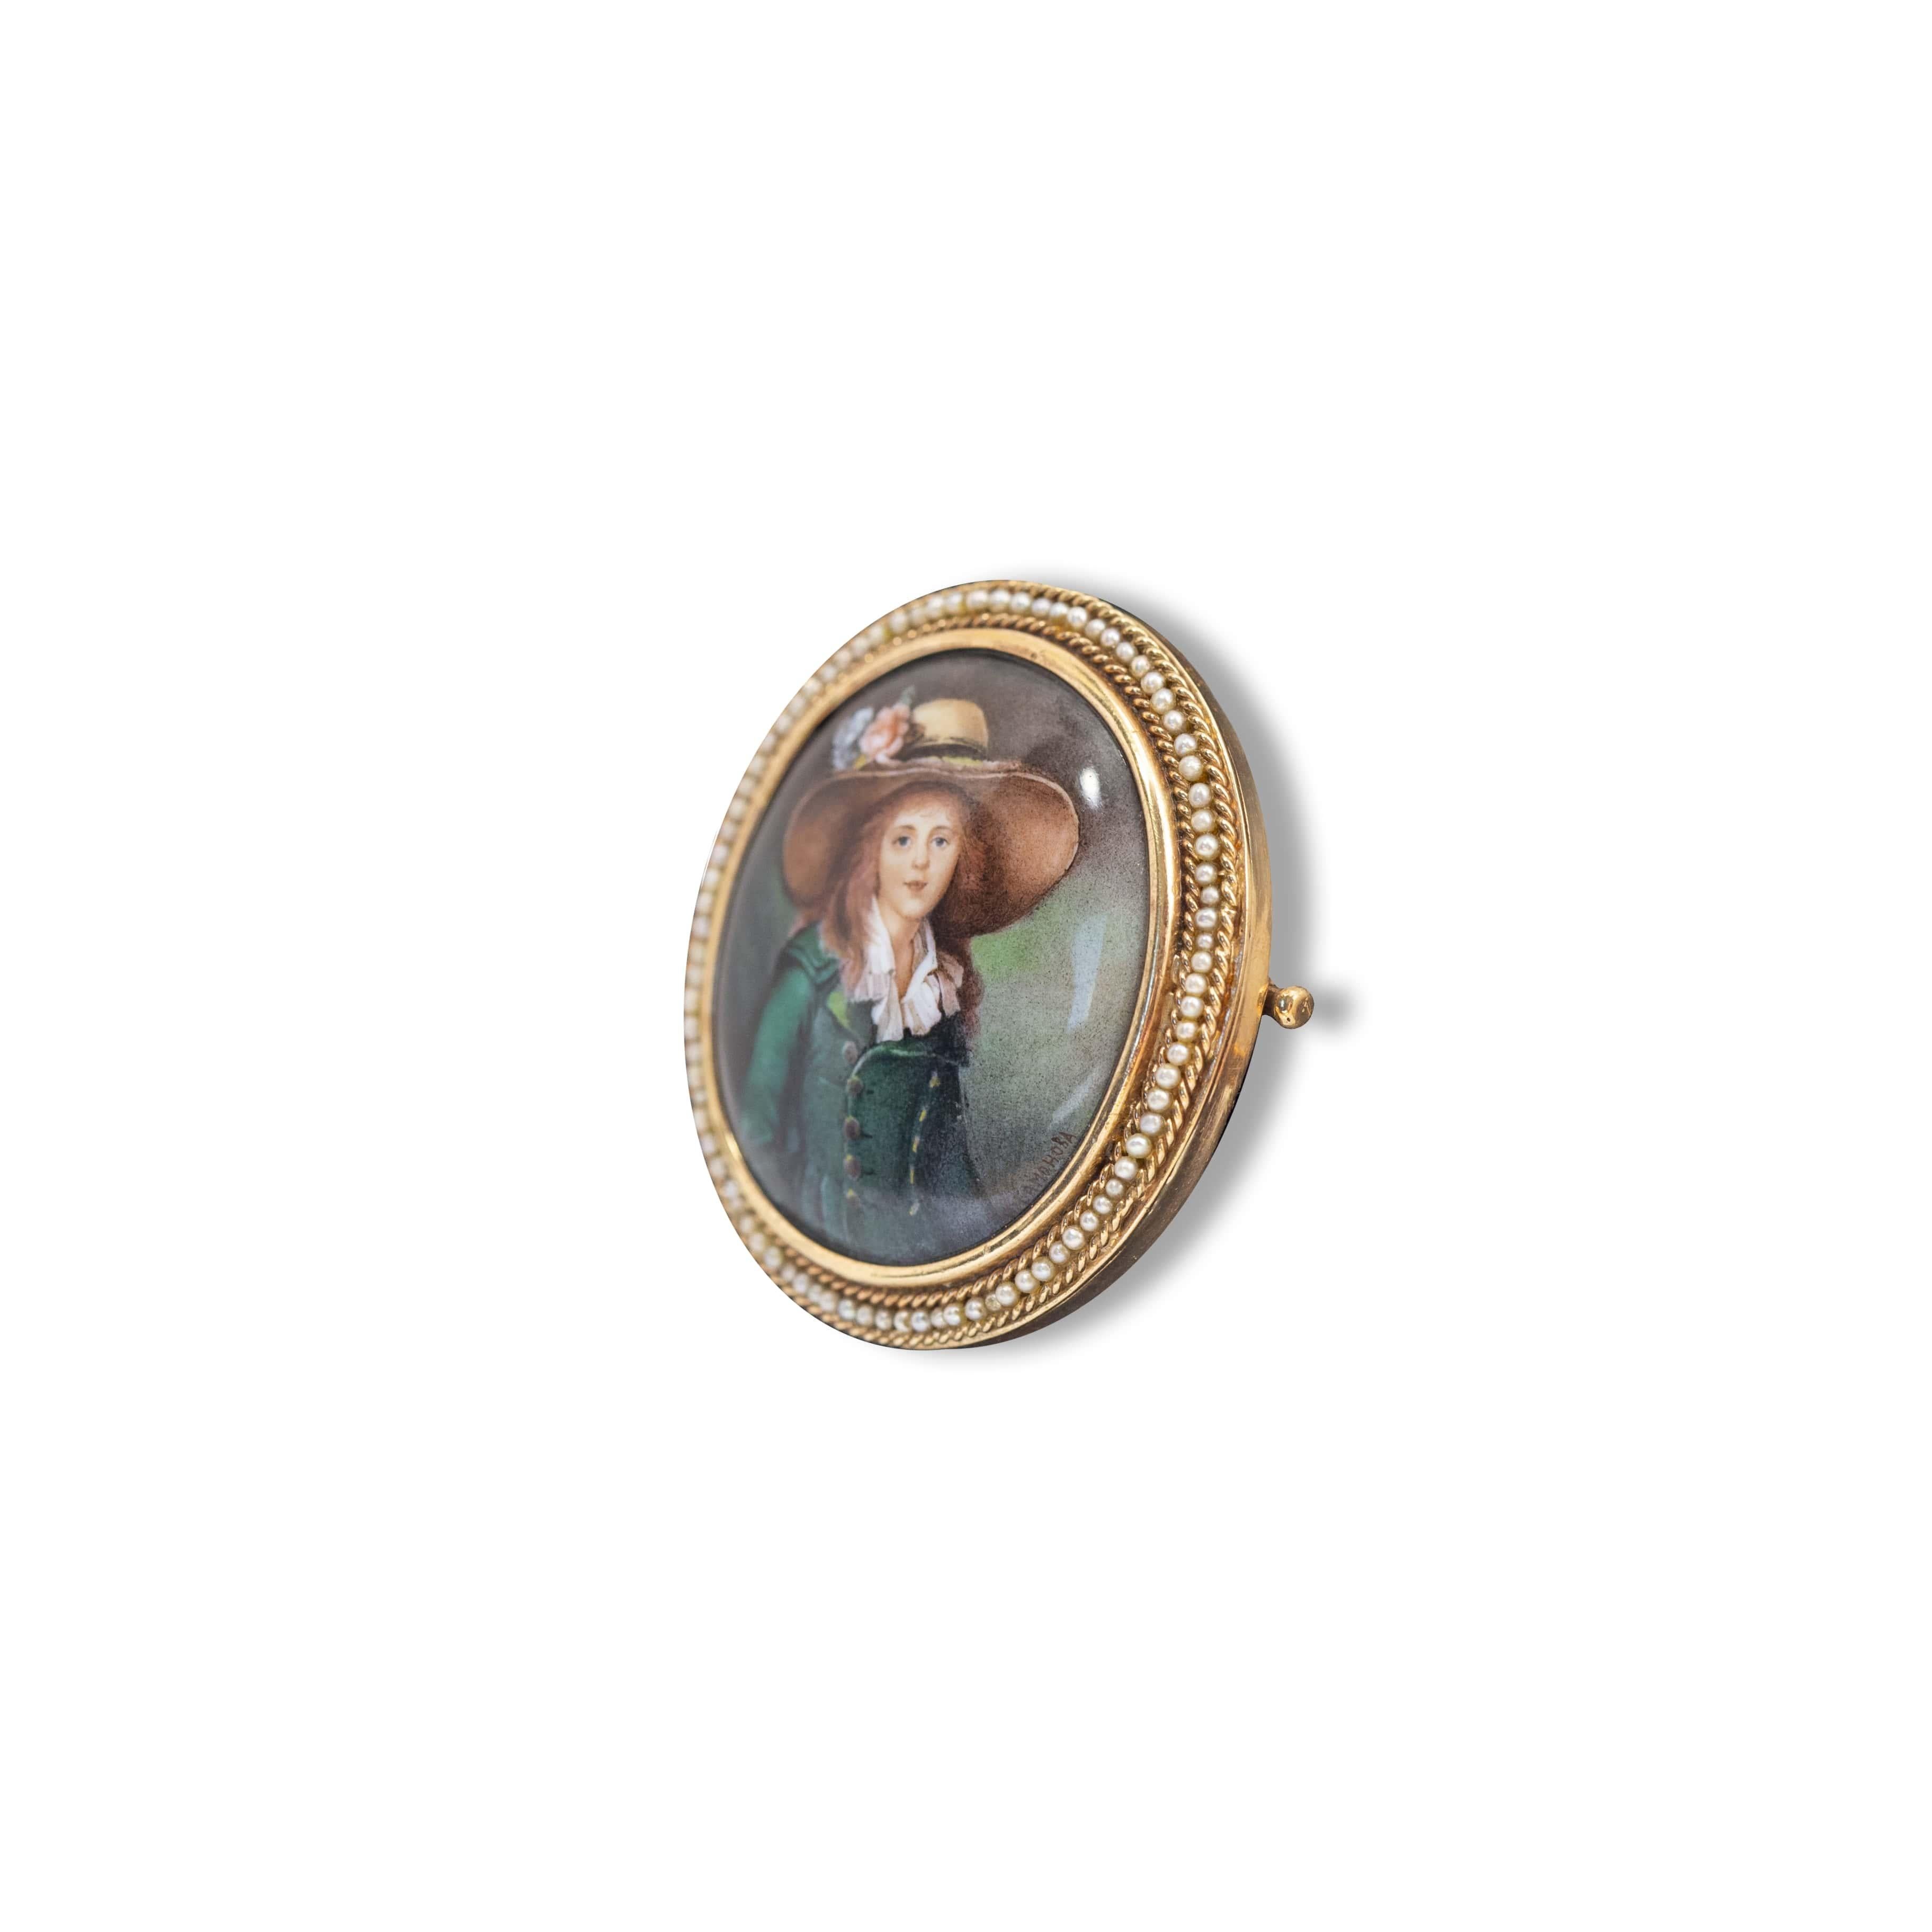 Amazing antique circa early Victorian miniature portrait set in 14k gold with seed pearls. The lovely young woman in straw hat. Fine condition hallmarked and tested for 14k gold. The painting is signed in the right corner edge looks like CAMOHOBA.